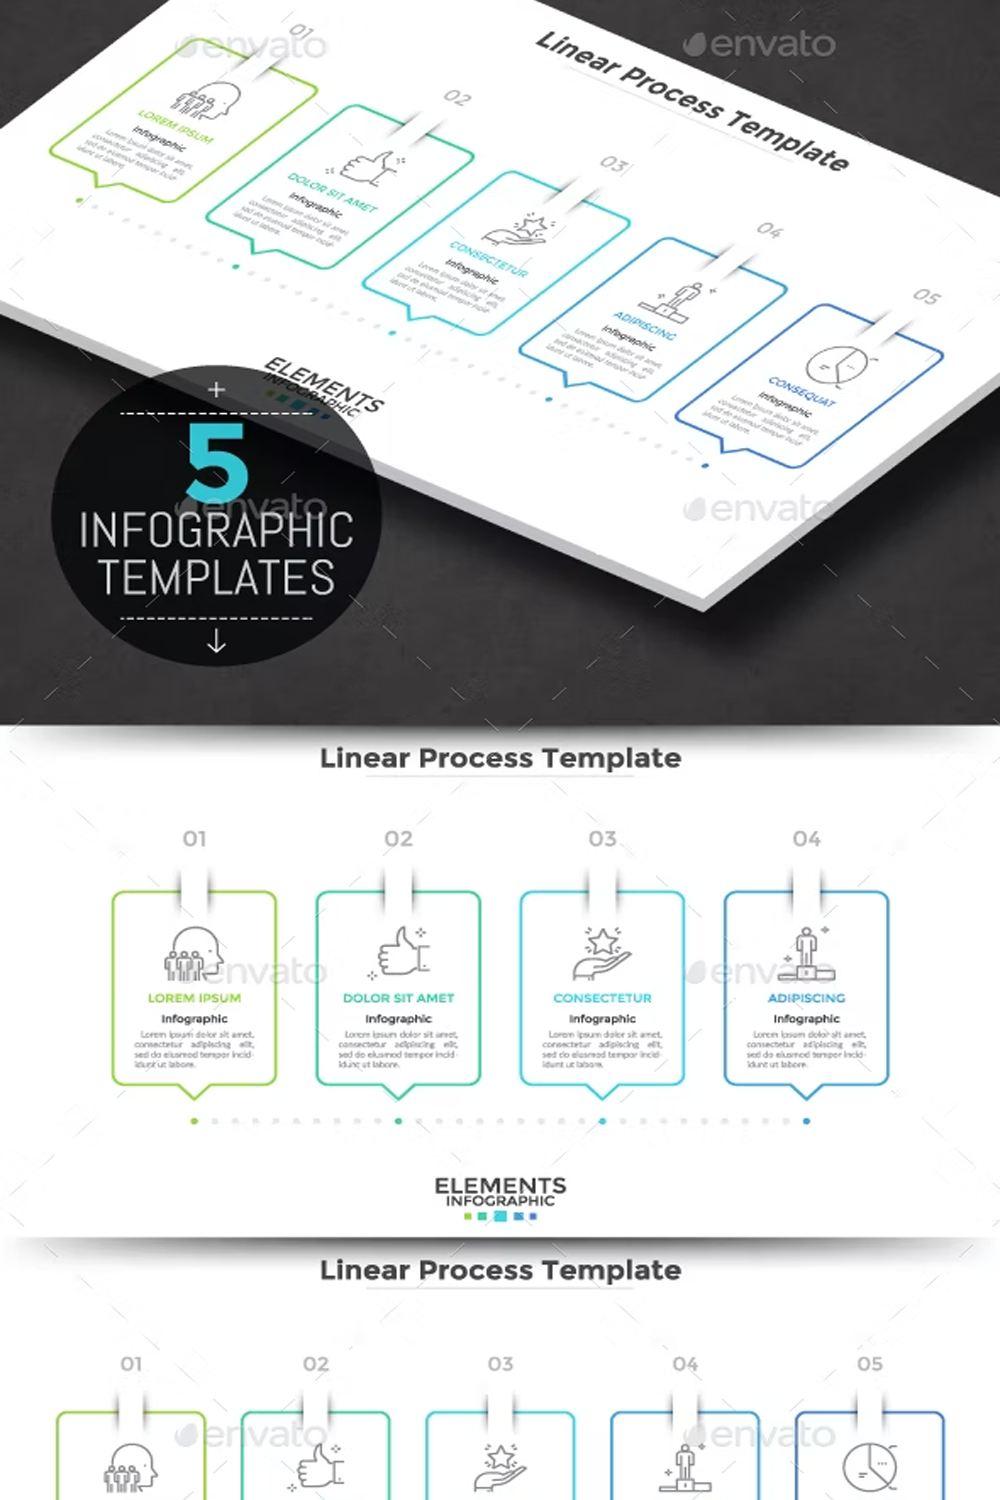 Illustrations modern infographic linear template 5 items of pinterest.